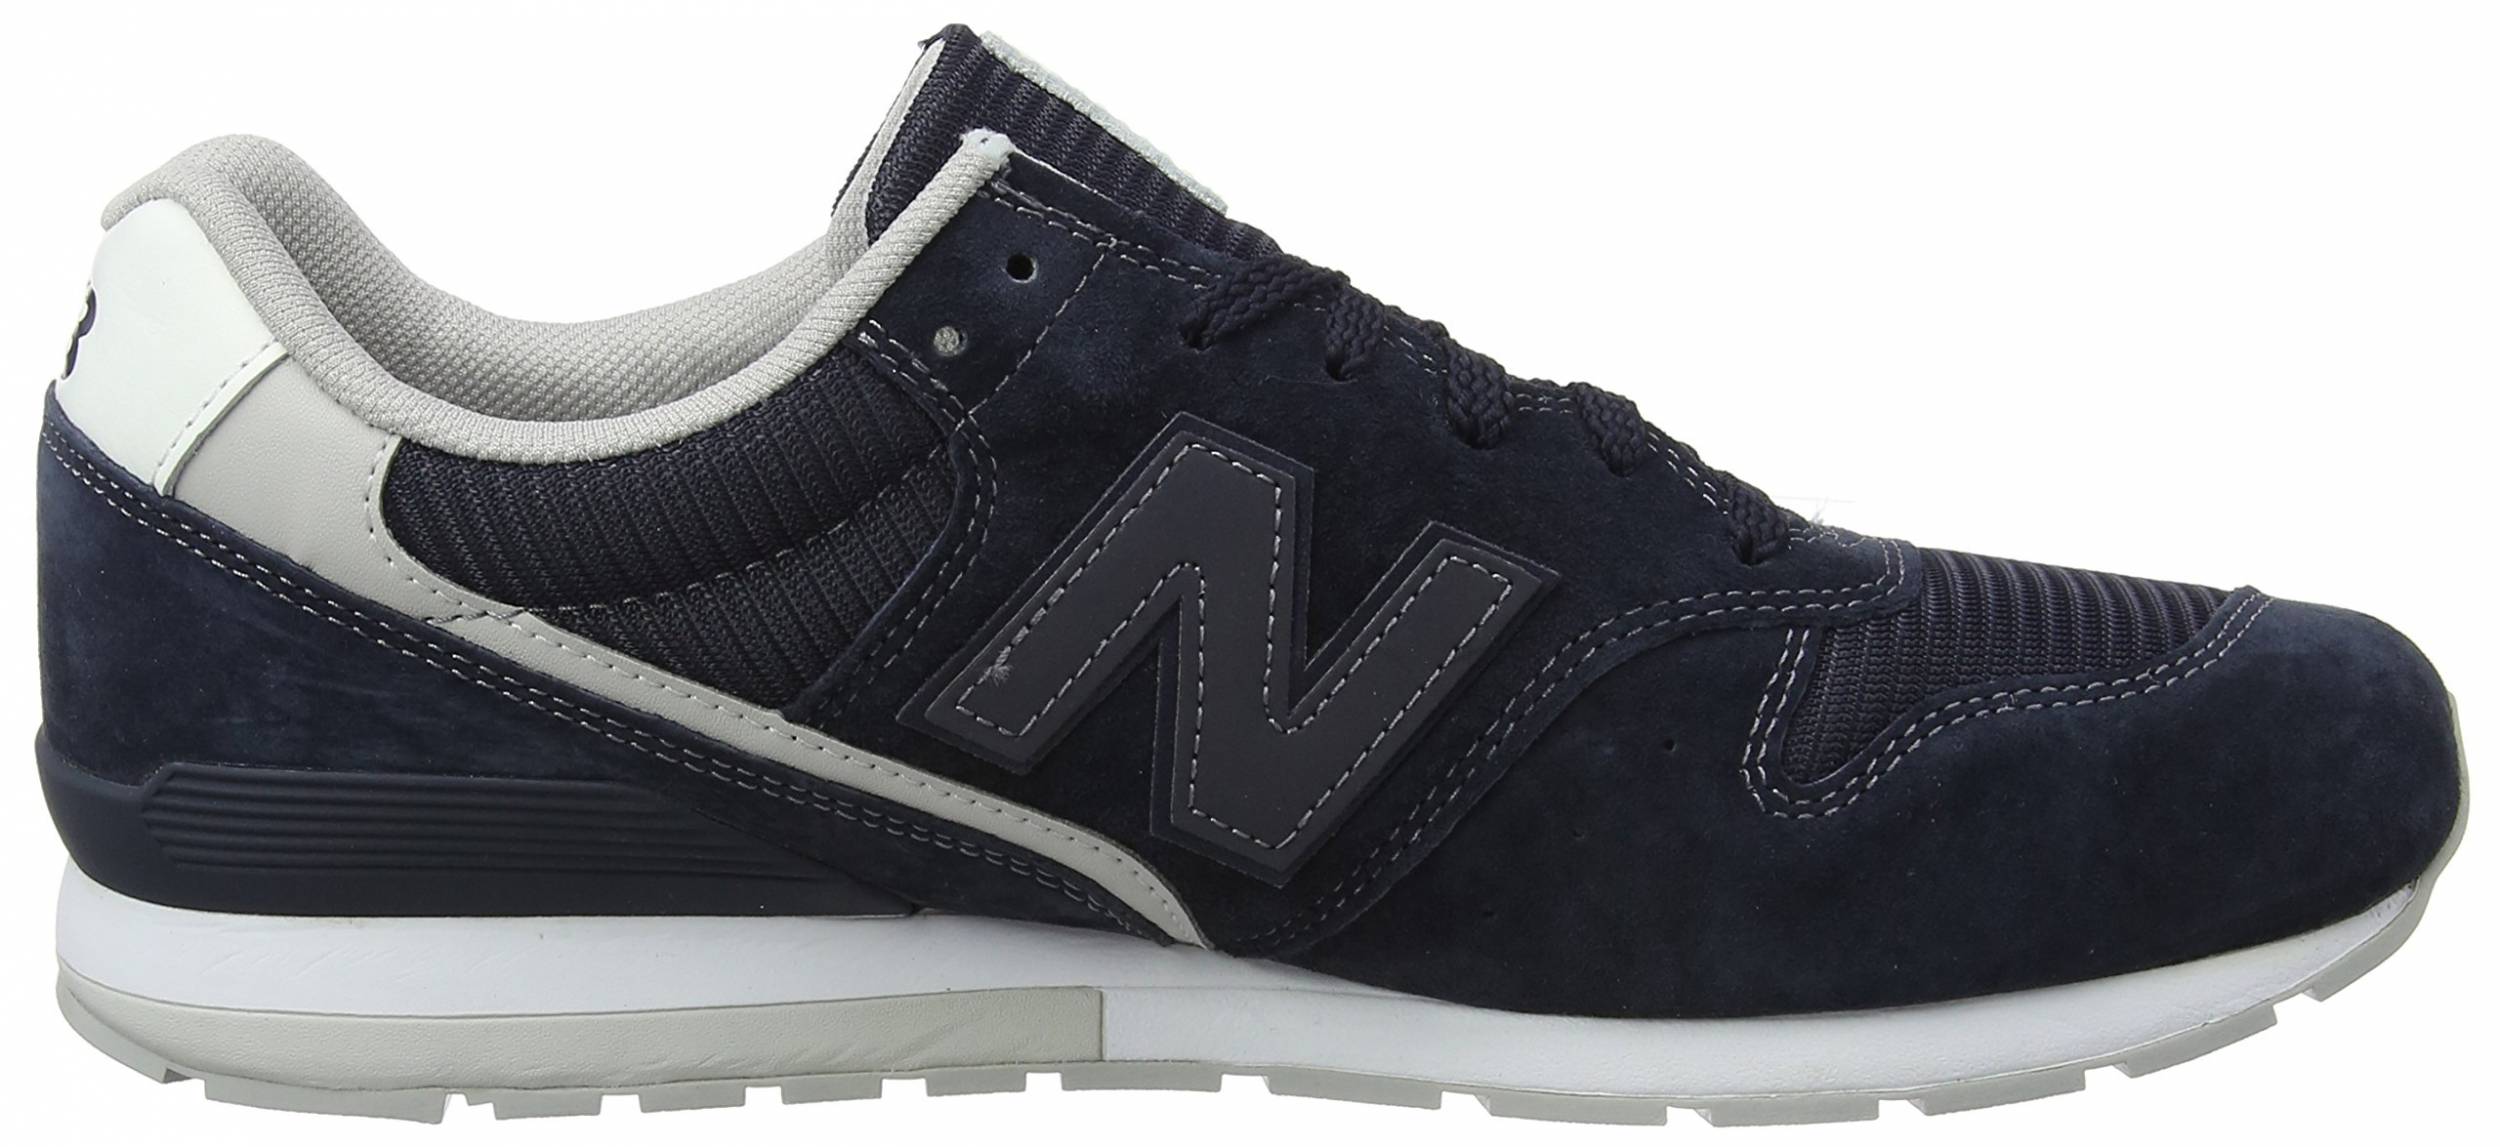 best rated new balance shoes